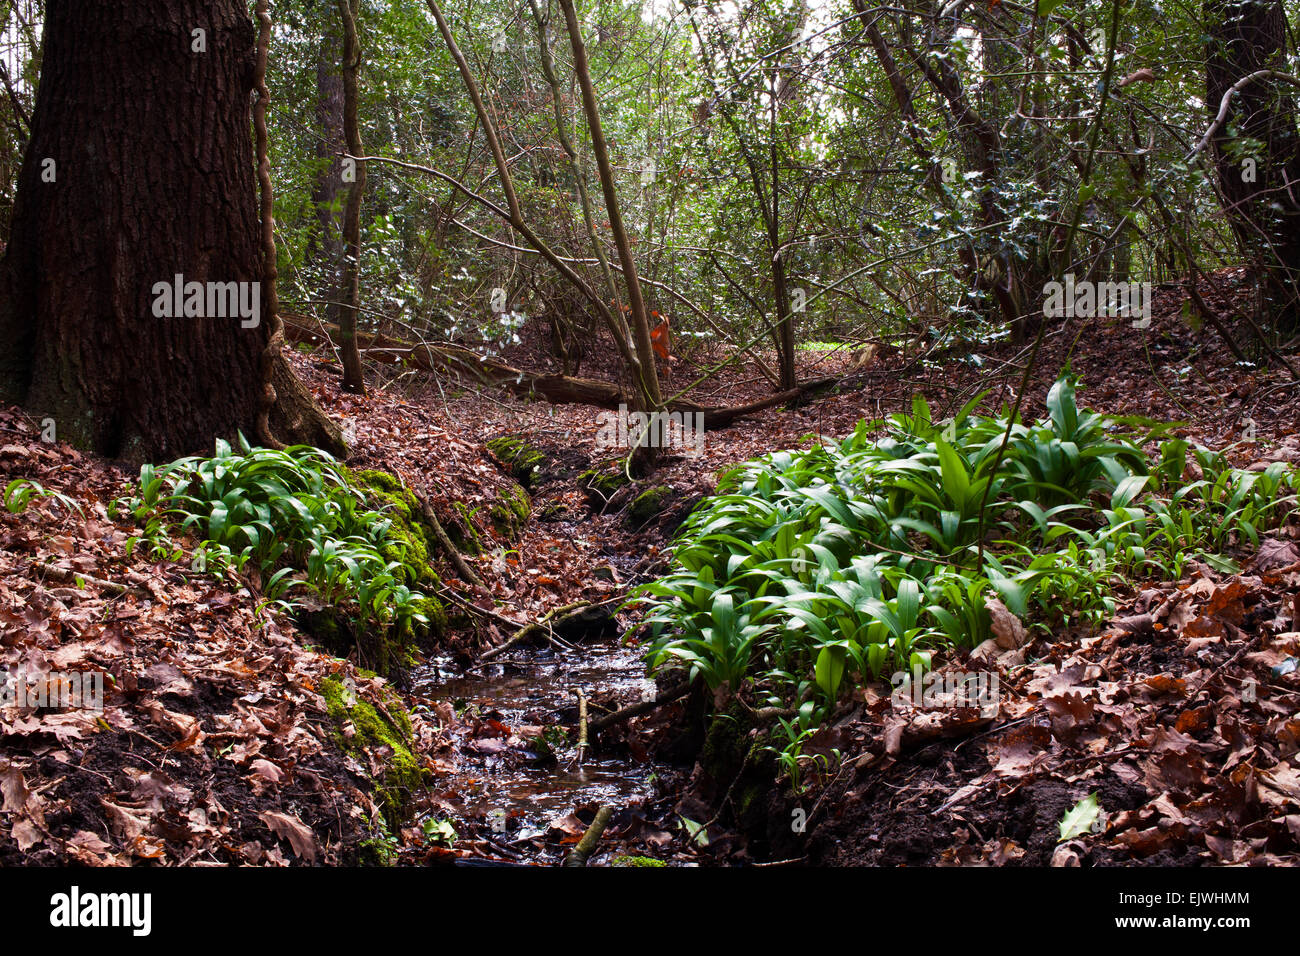 A small stream running through a forest. Stock Photo